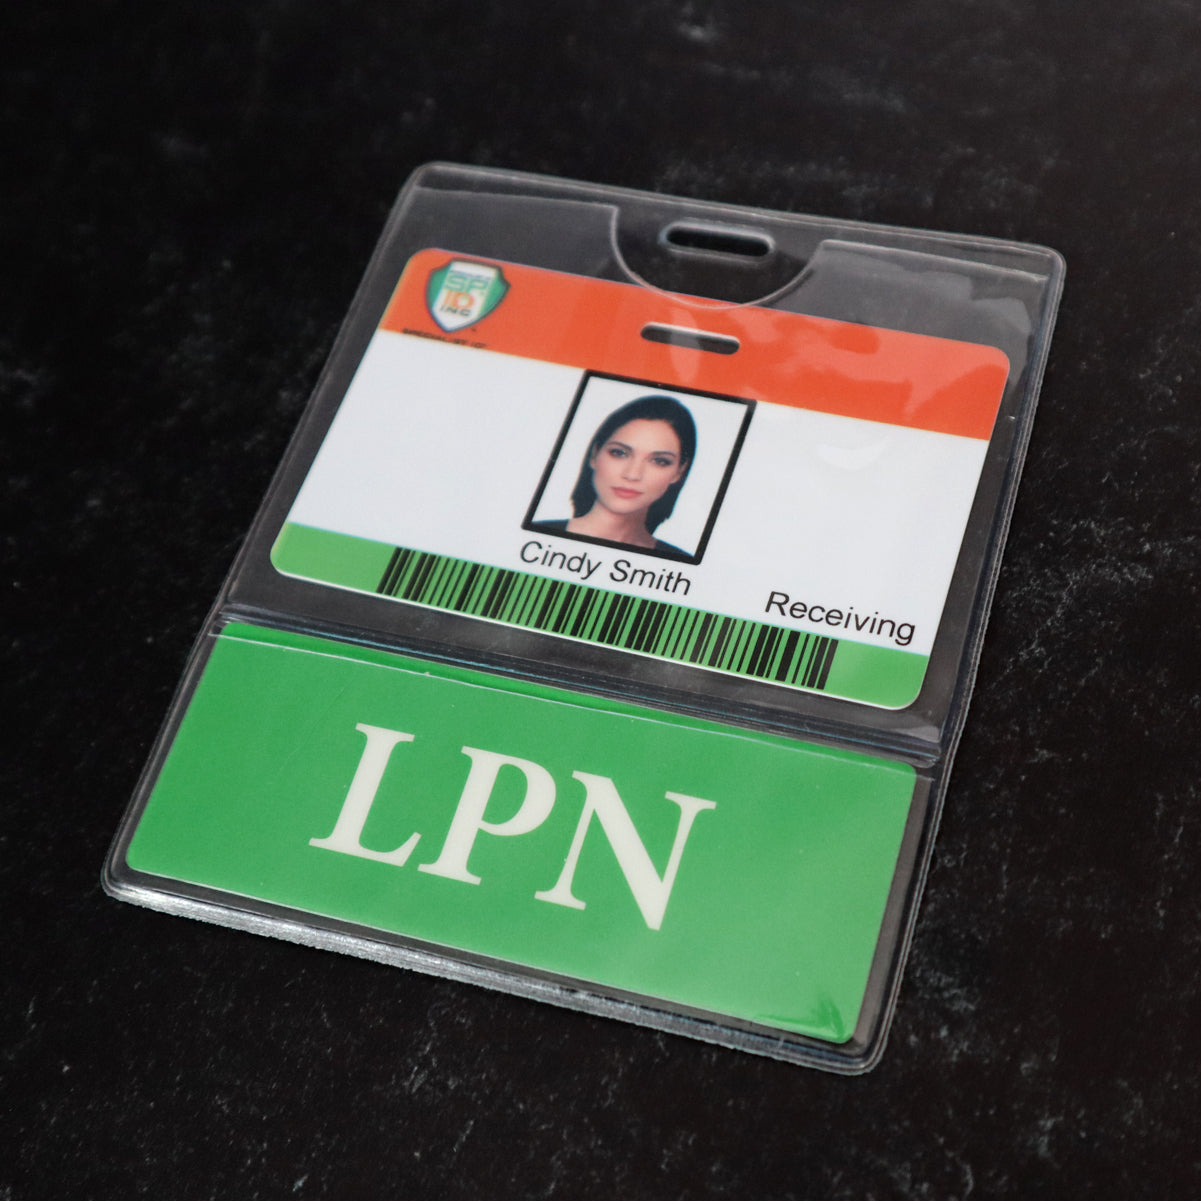 A Custom Printed BadgeBottoms® Horizontal (Badge Holder & Badge Buddy IN ONE) displaying a photo of a woman, name "Cindy Smith," and the word "Receiving," along with a green insert marked "LPN" at the badge bottom.